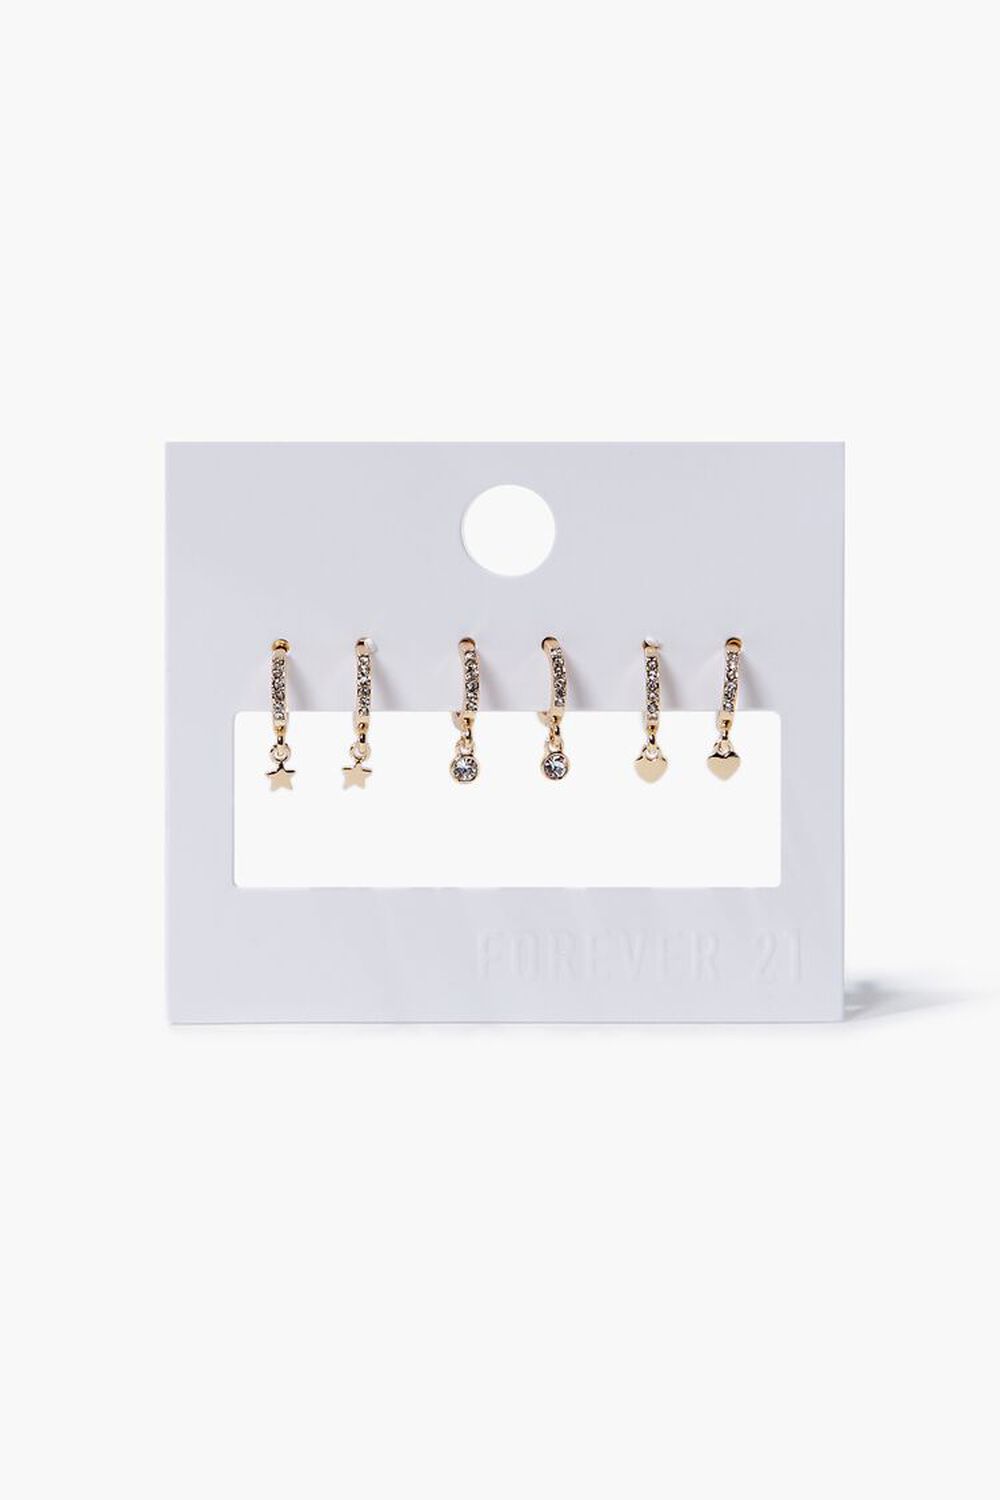 GOLD/CLEAR Star Charm Hoop Earring Set, image 1